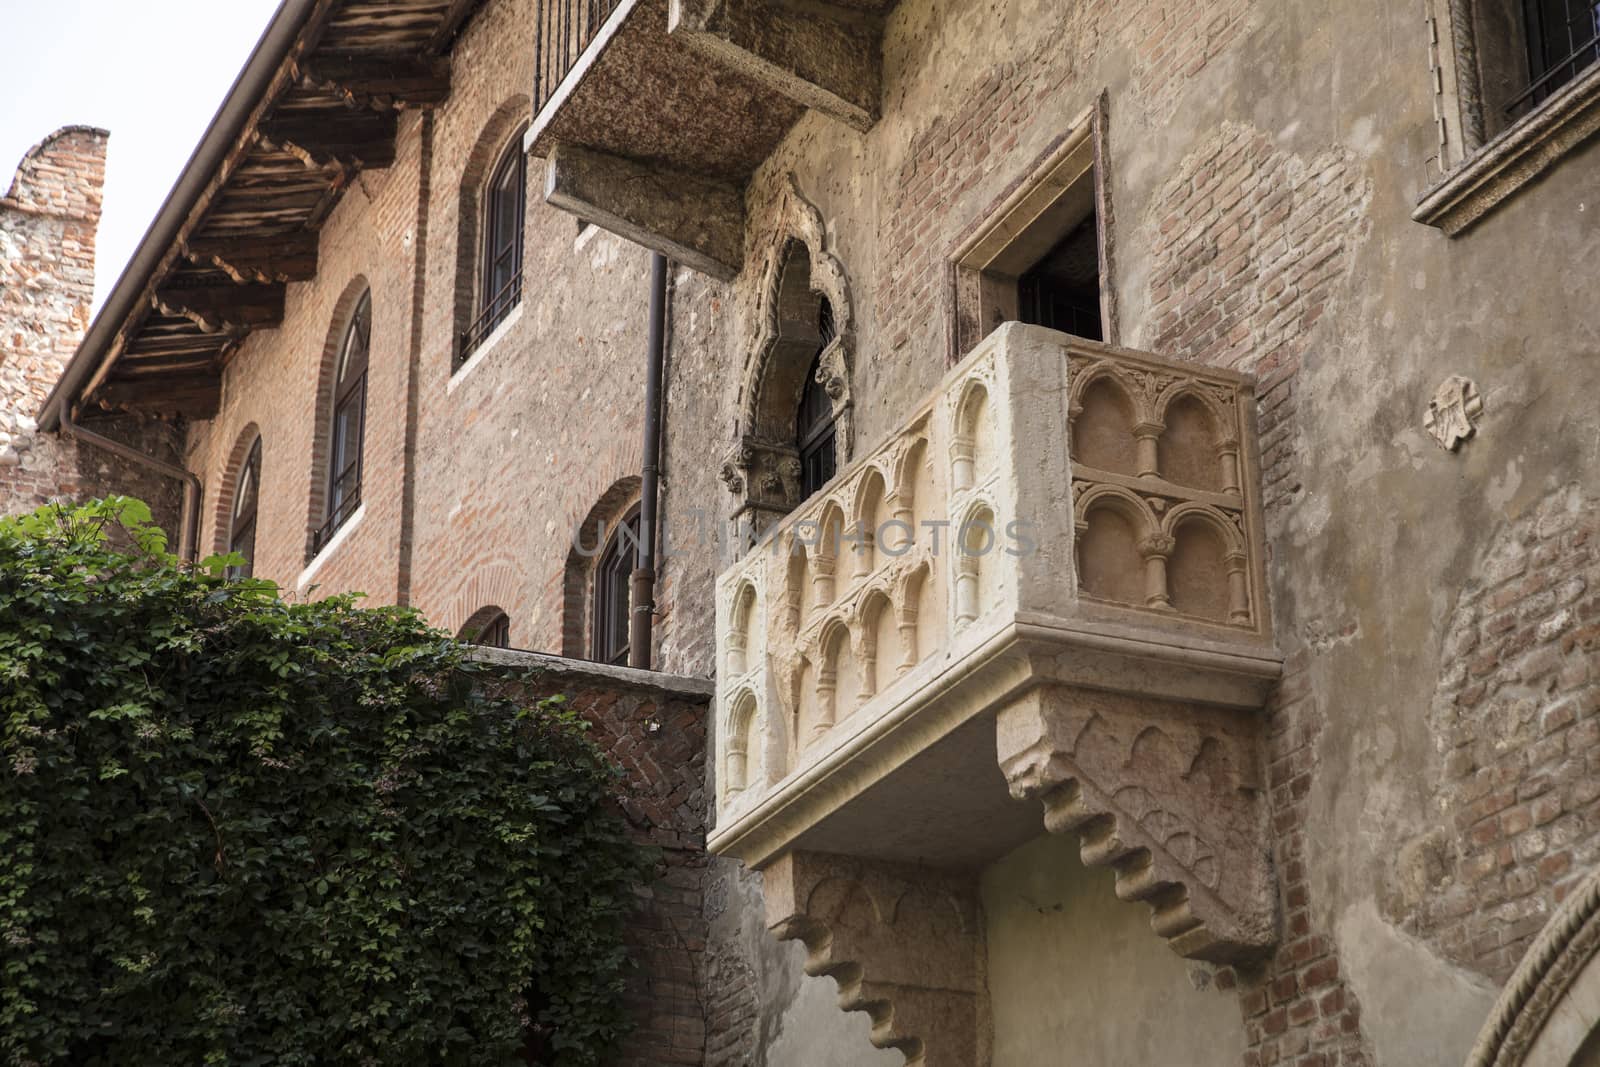 Verona, Italy, Europe, August 2019, the Balcony from Romeo and Juliet